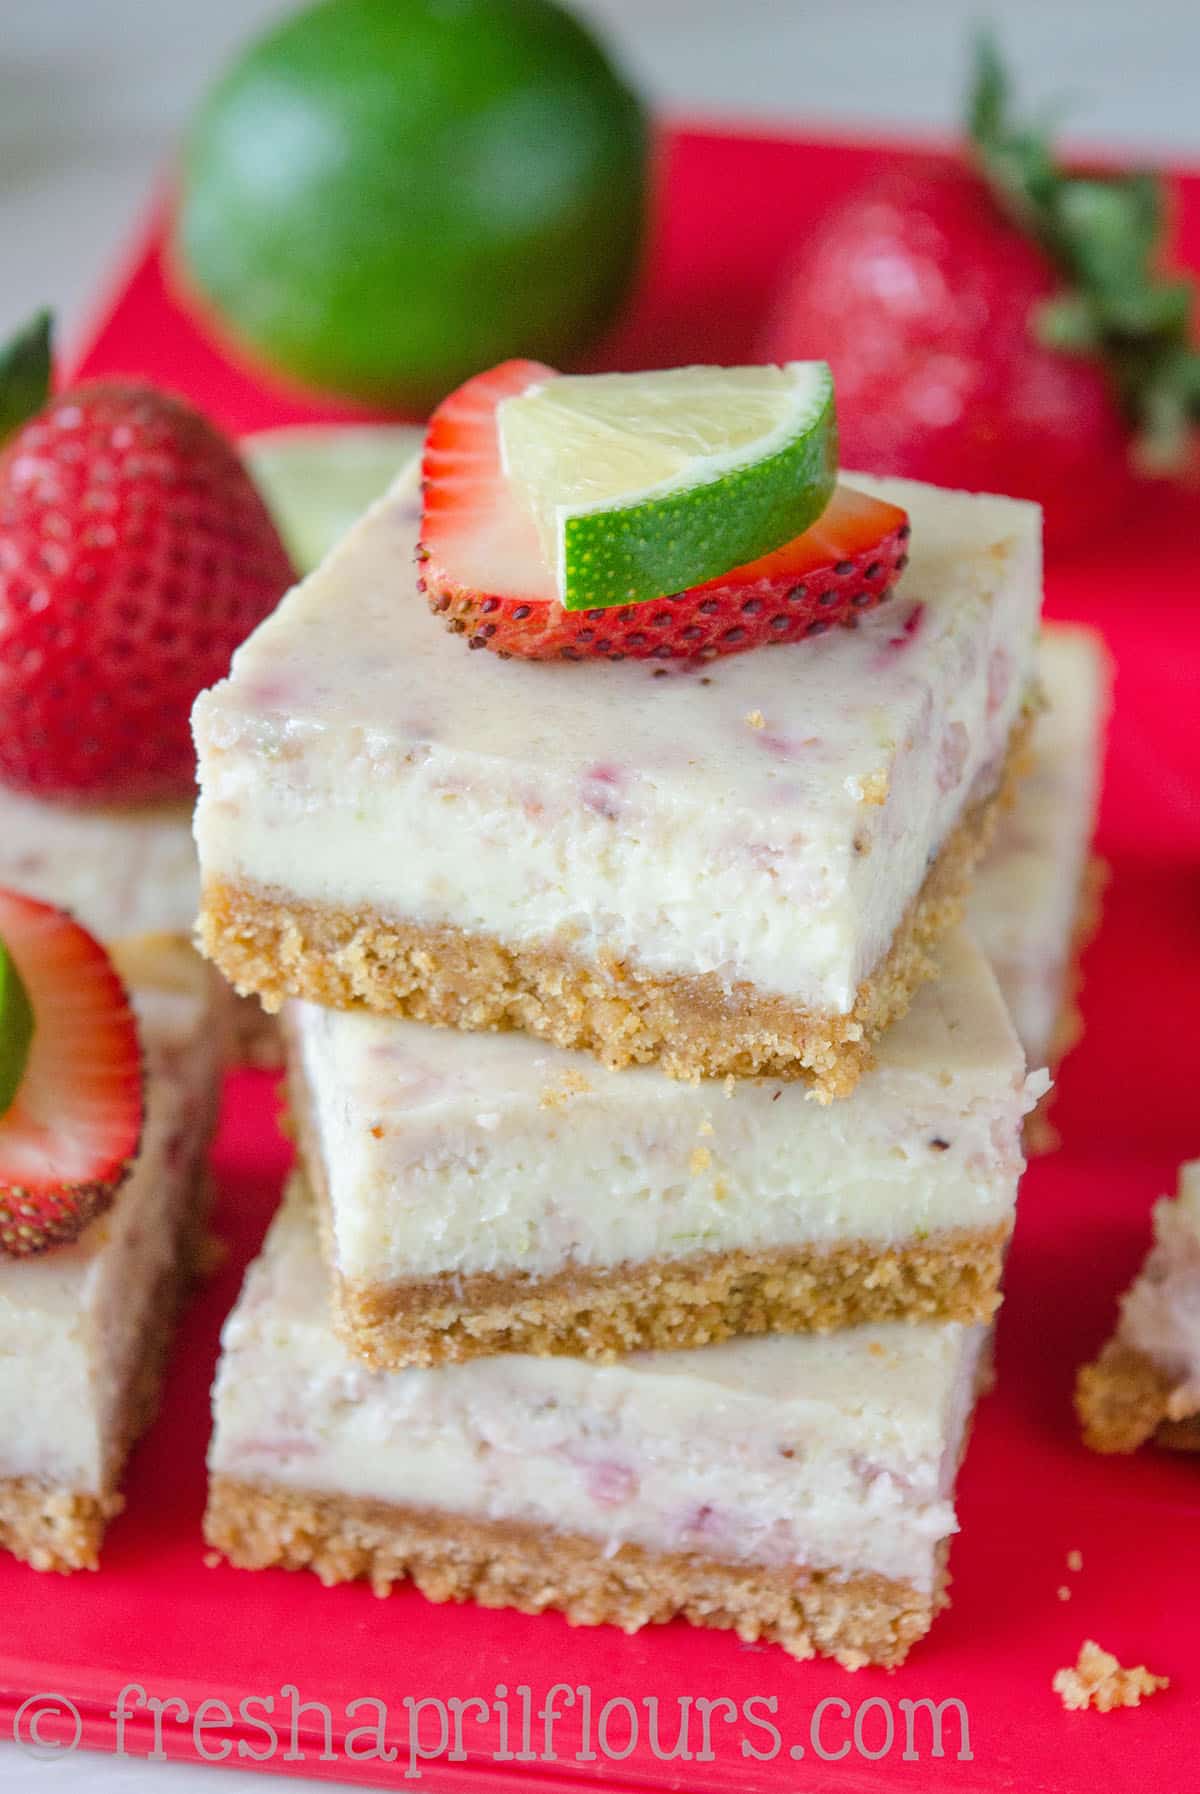 Strawberry Margarita Squares: A tart and creamy lime cheesecake filling is bursting with juicy strawberries and jazzed up with tequila. Perfect for a summer picnic!